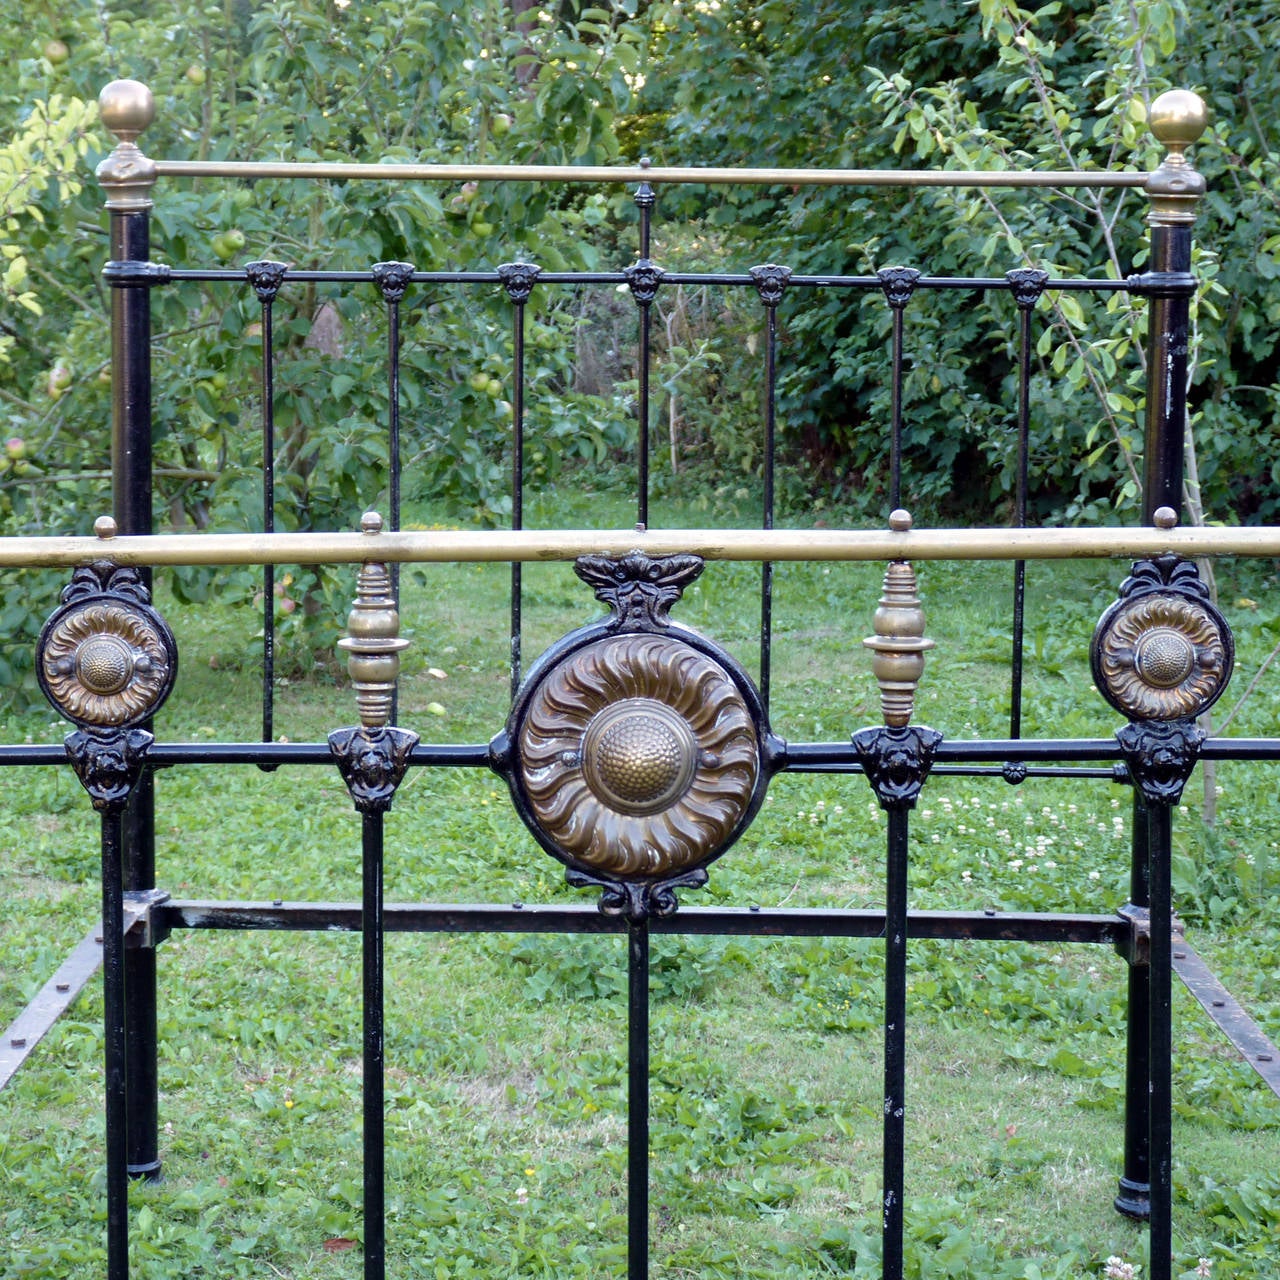 A decorative brass and iron bed with superb brass rosettes depicting large sunflowers.

This bed is shown here in its original condition. Currently the width is a Standard British Double at 54 in. (135 cm). However we can widen and lengthen the